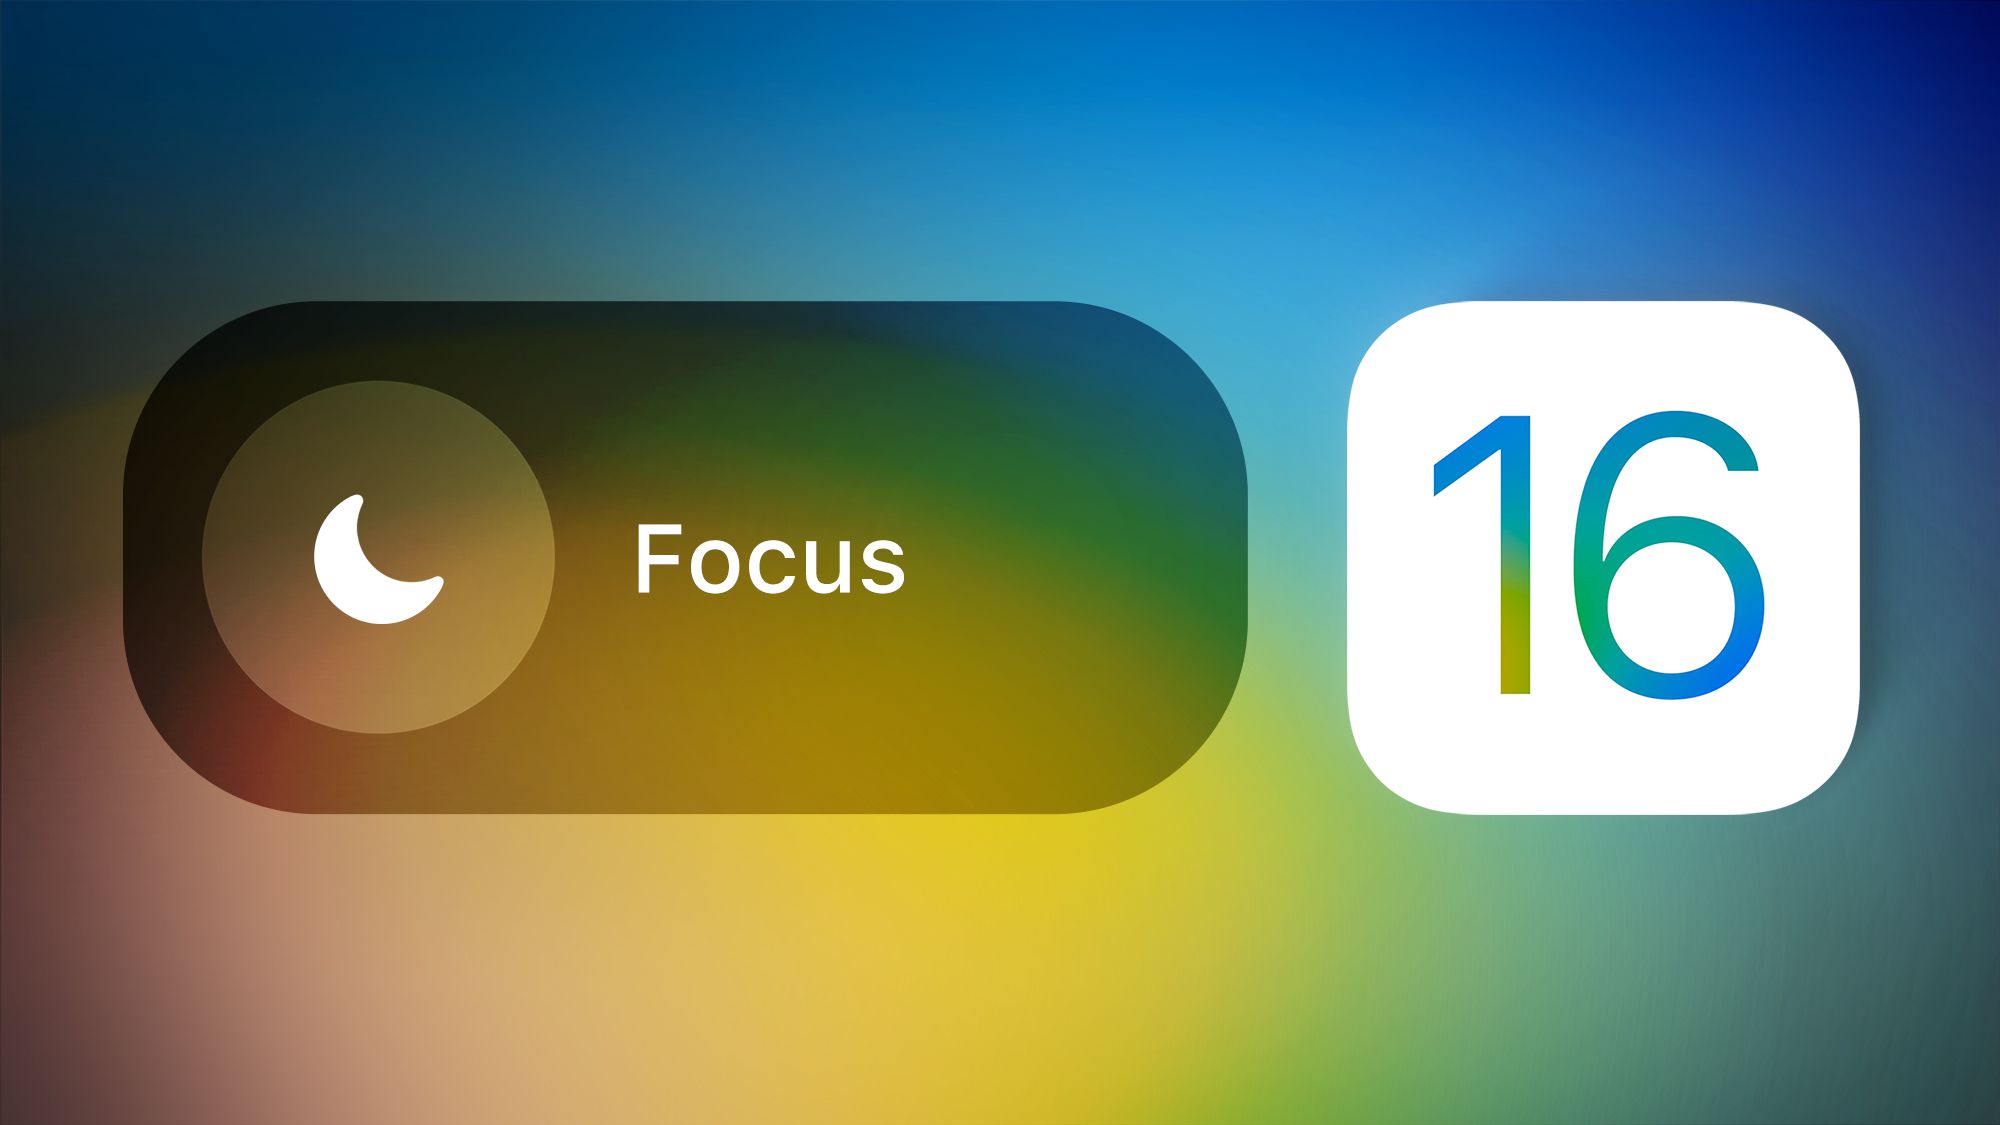 iOS 16 Focus Guide: What's New With Apple's Focus Mode - MacRumors